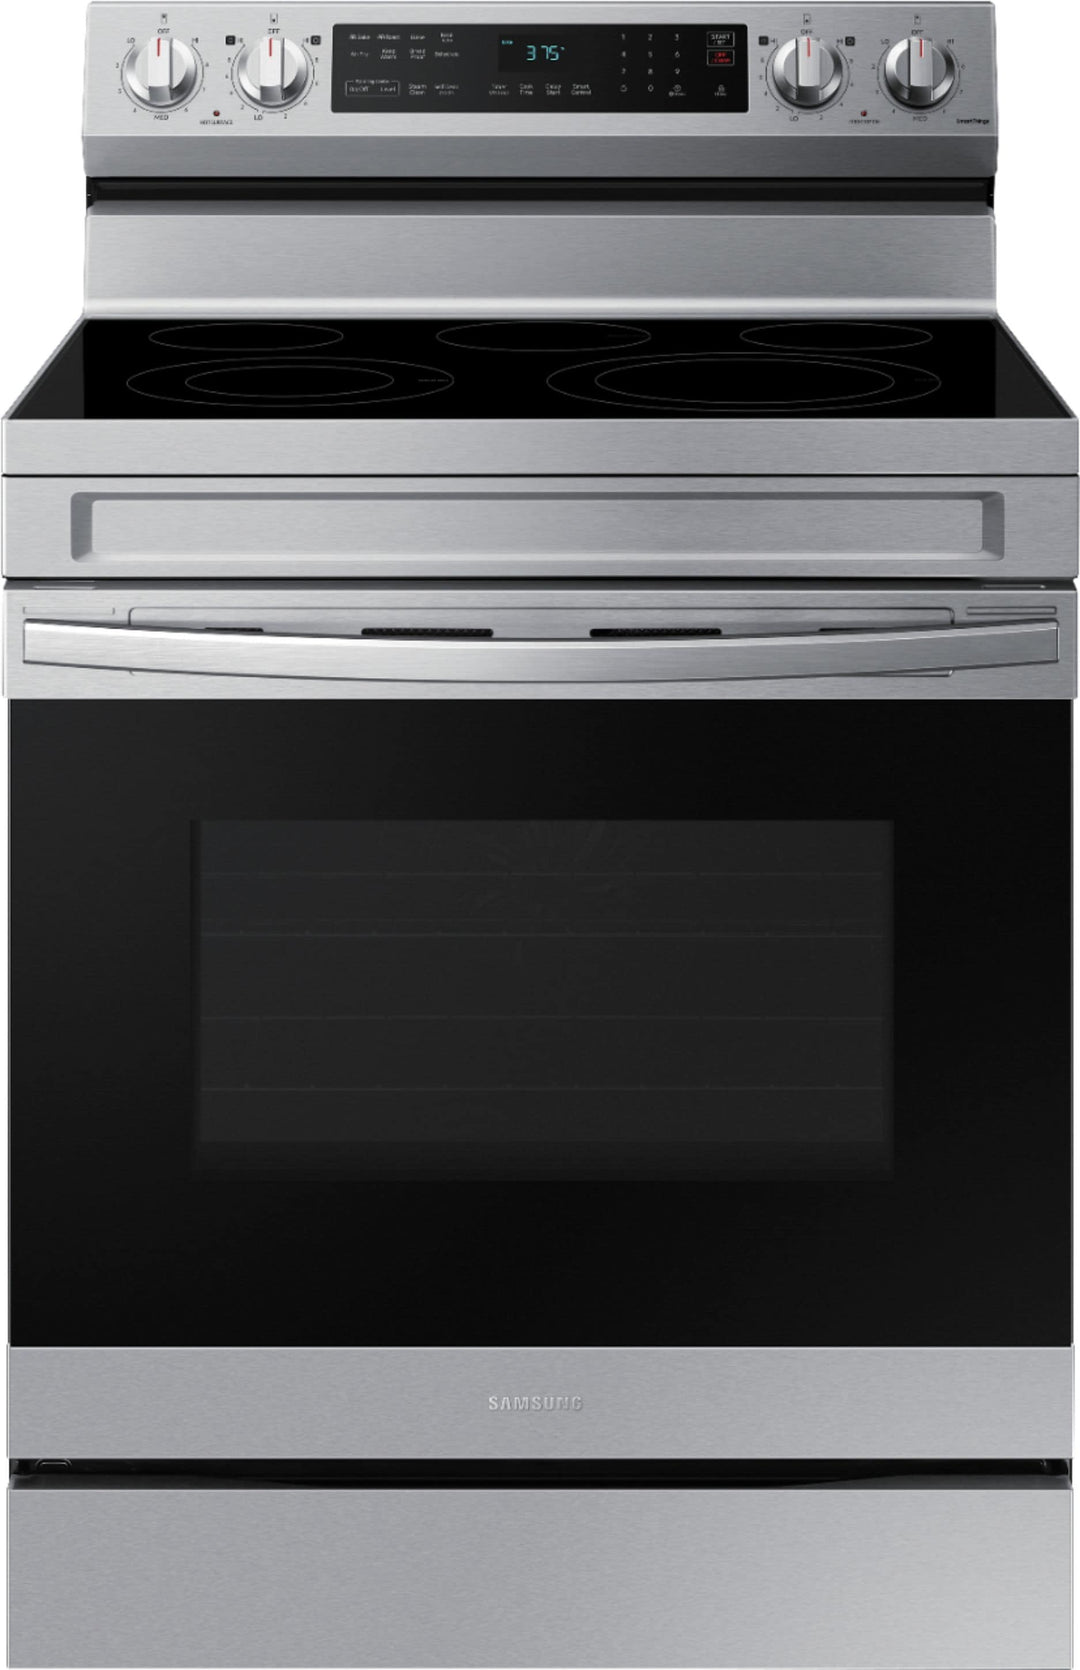 Samsung - 6.3 cu. ft. Freestanding Electric Range with WiFi, No-Preheat Air Fry & Convection - Stainless steel_0